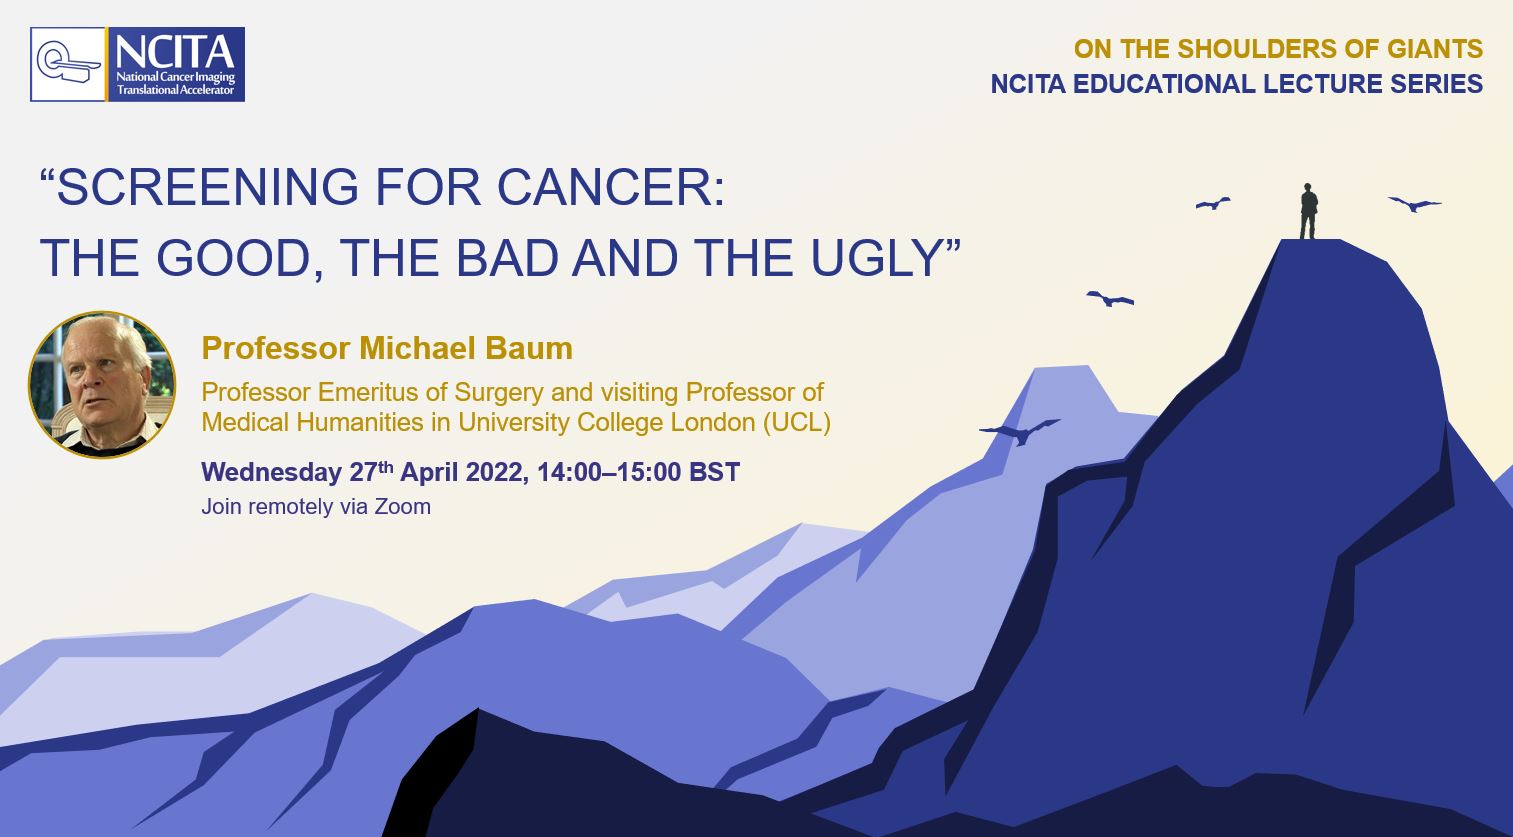 Screening for Cancer: The Good, The Bad and The Ugly Professor Michael Baum, Professor Emeritus of Surgery and visiting Professor of Medical Humanities in University College London (UCL) Wednesday 27th April 2022, 14:00–15:00 BST